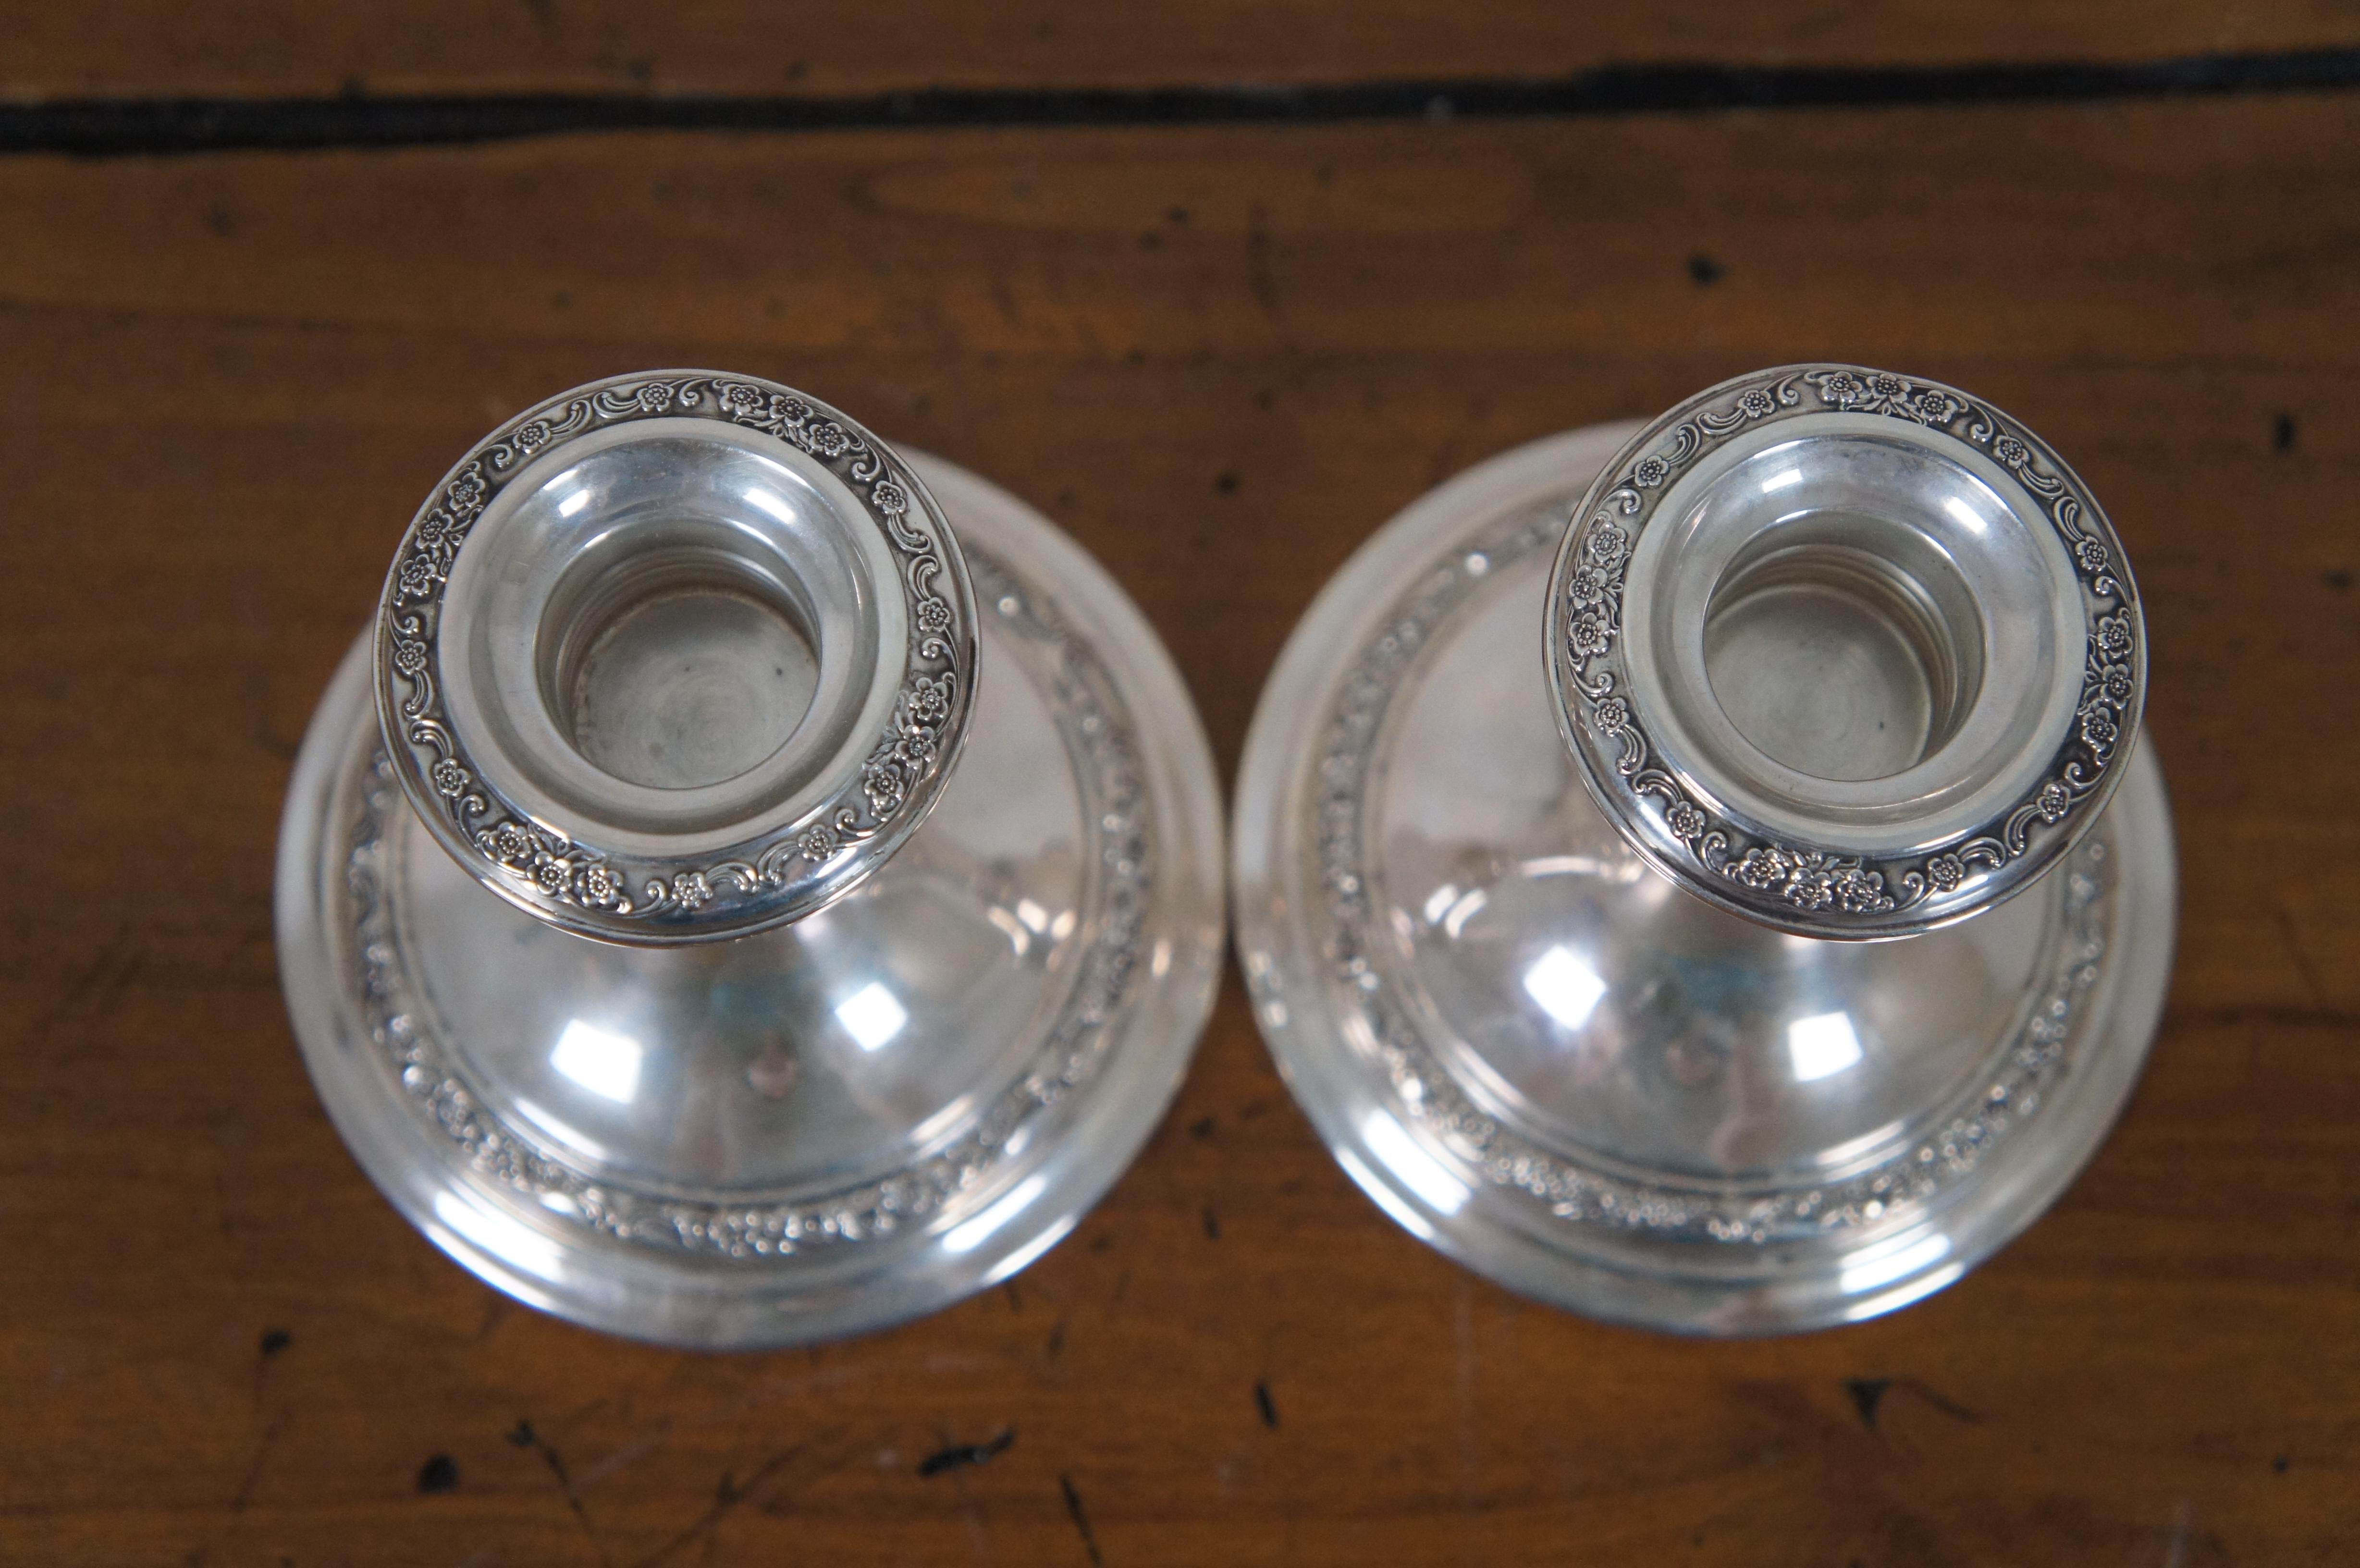 gorham sterling candle holders